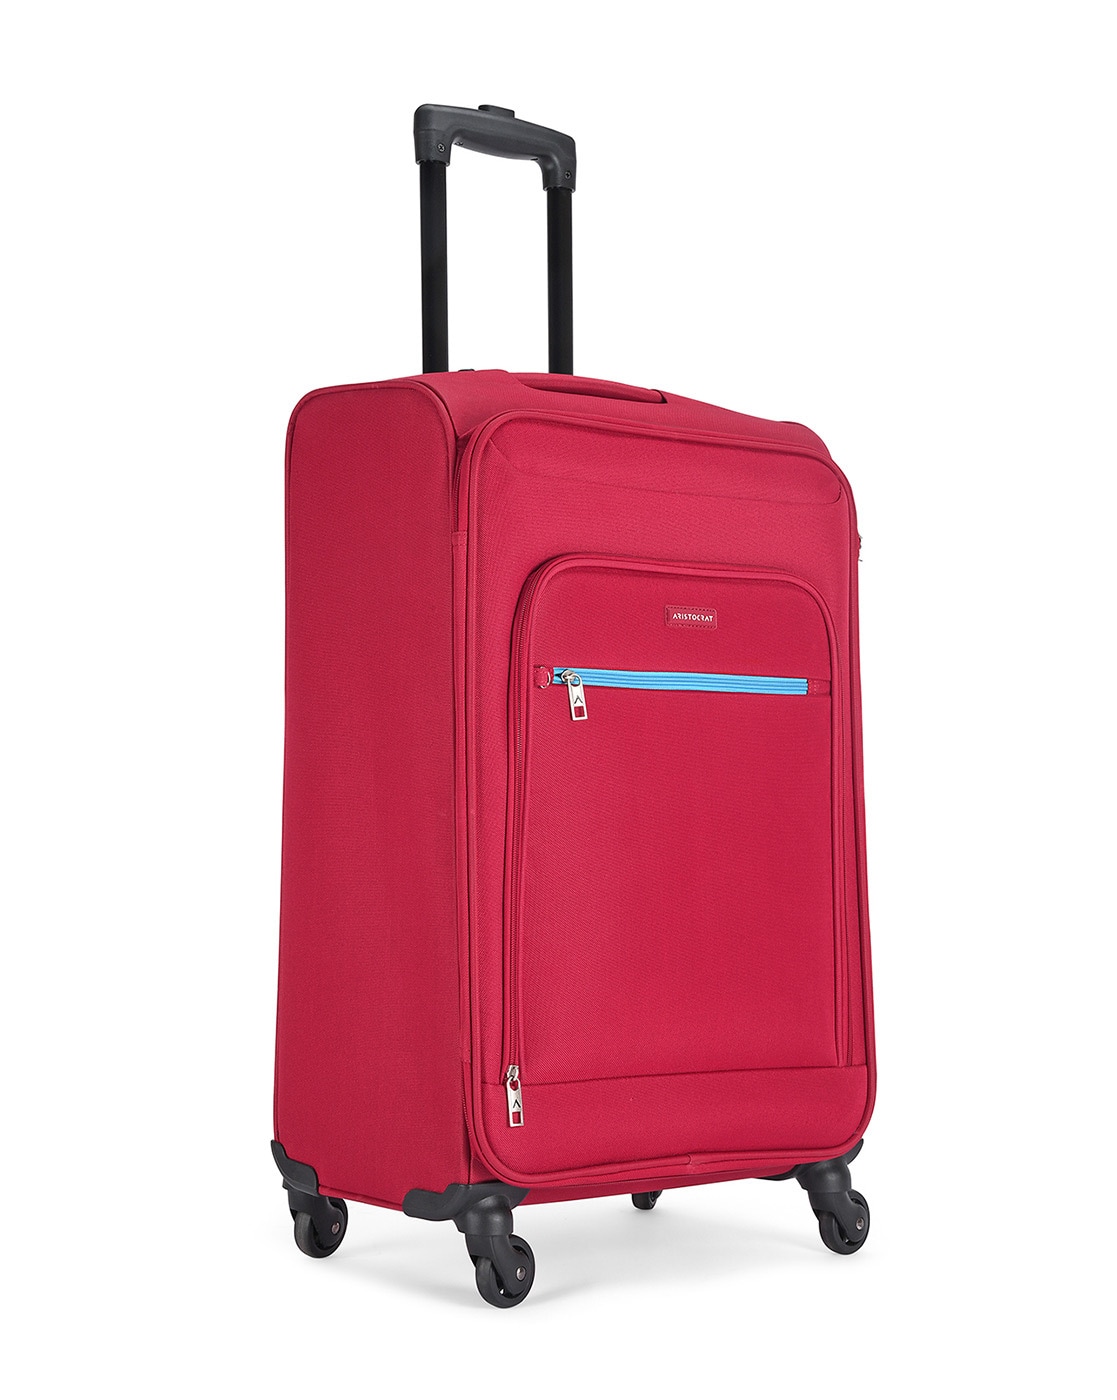 VIP ARISTOCRAT Trolley set of 3 Polycarbonate |Suitcase Number Lock|Anti  Theft Zip| Cabin & Check-in Set 4 Wheels - 31 inch RED - Price in India |  Flipkart.com